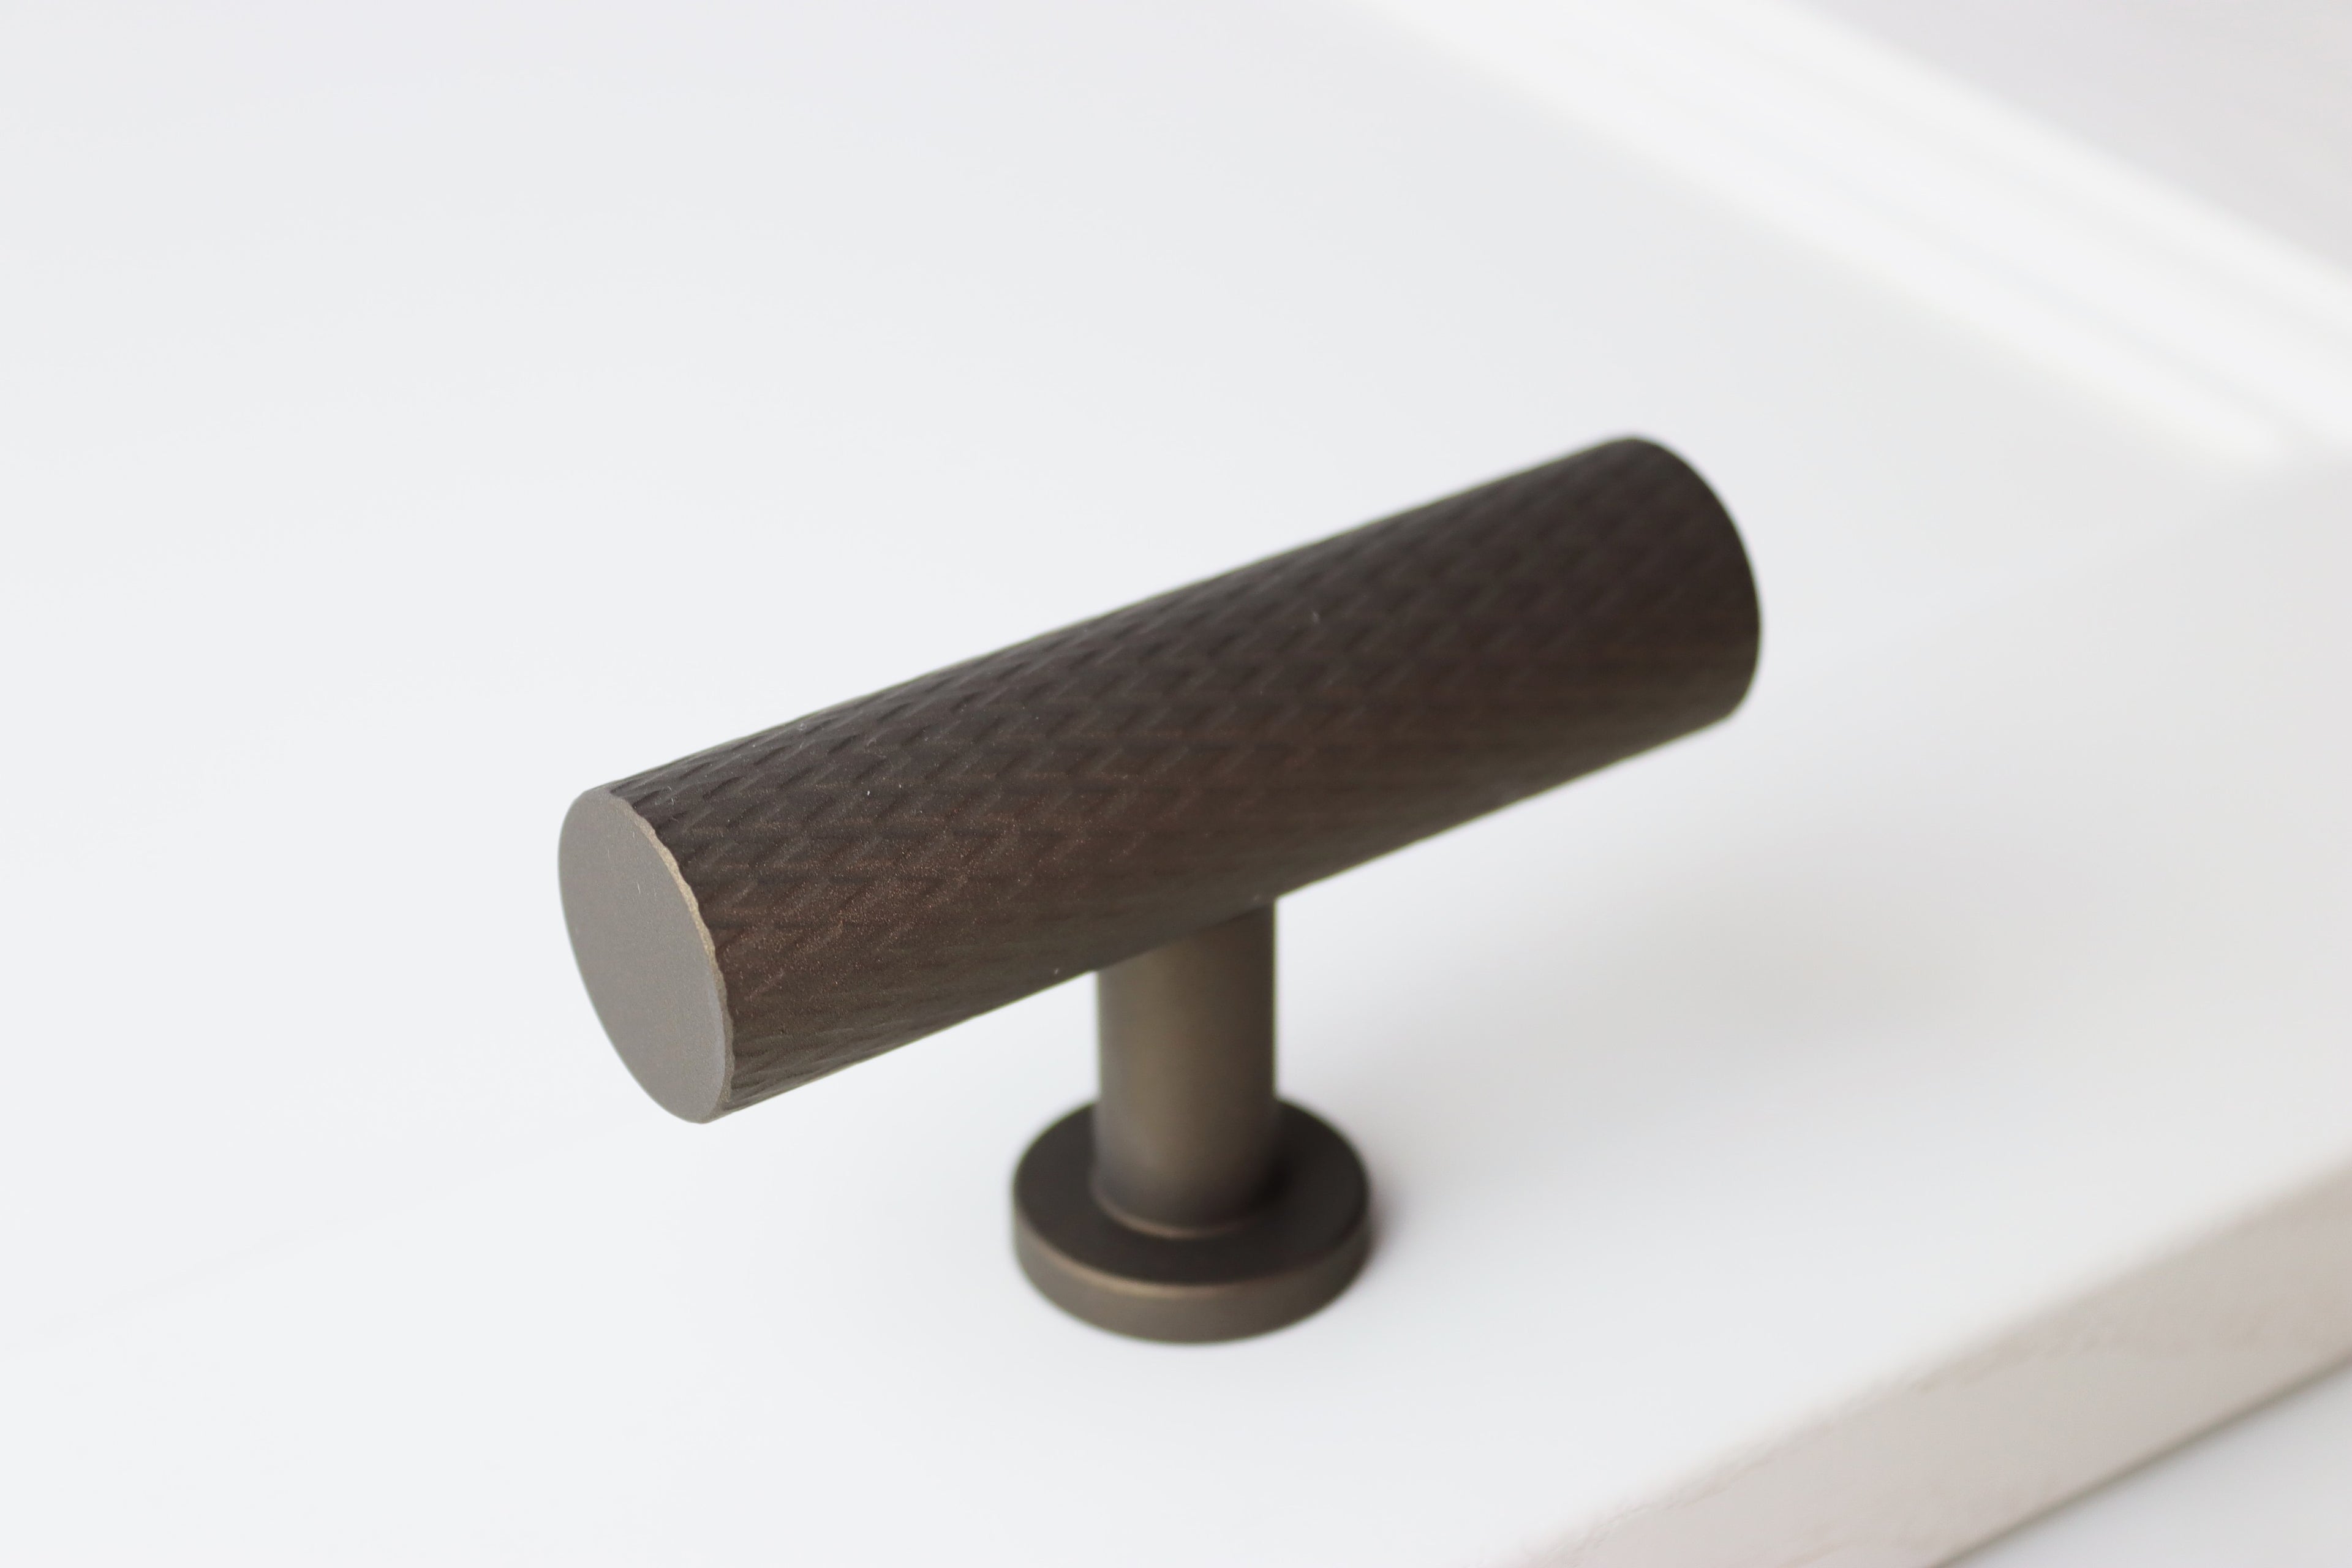 t-bar pull handle for cabinetry in Kent, UK. solid brass - black t bar, brass t bar, midnight bronze t bar